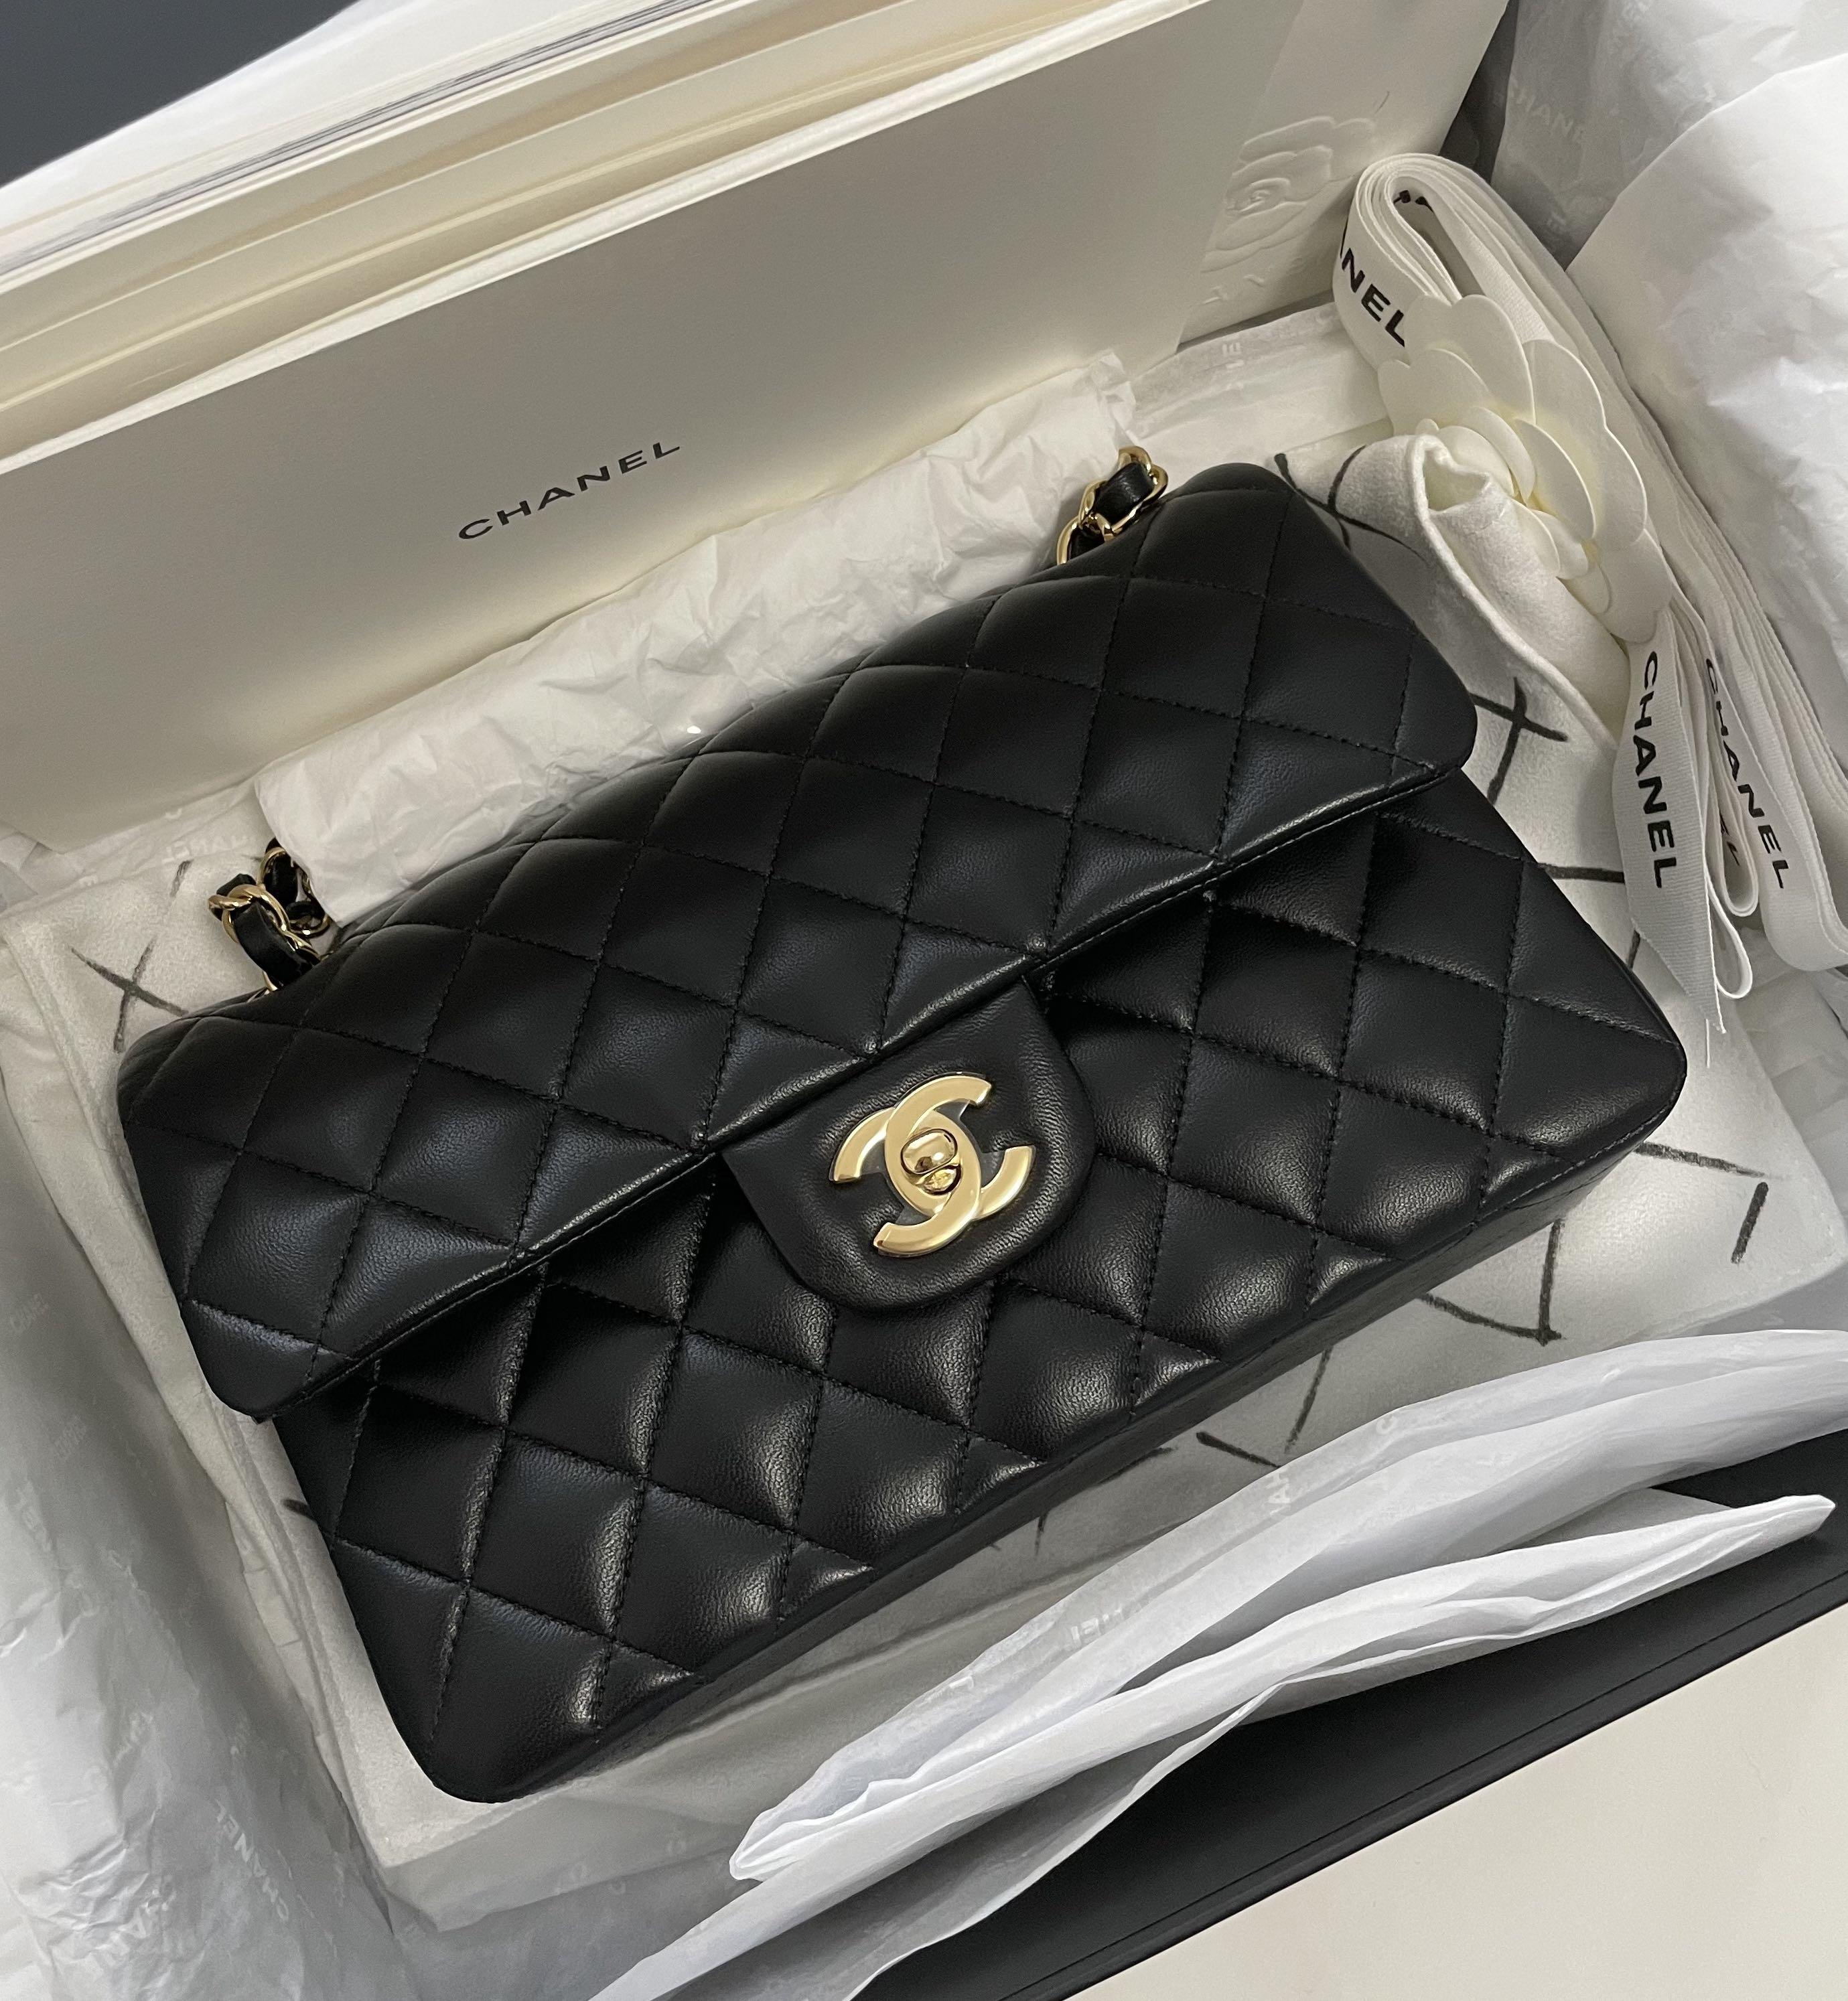 CHANEL So Black Small Classic Double Flap Black Pearly Lambskin RARE 23B